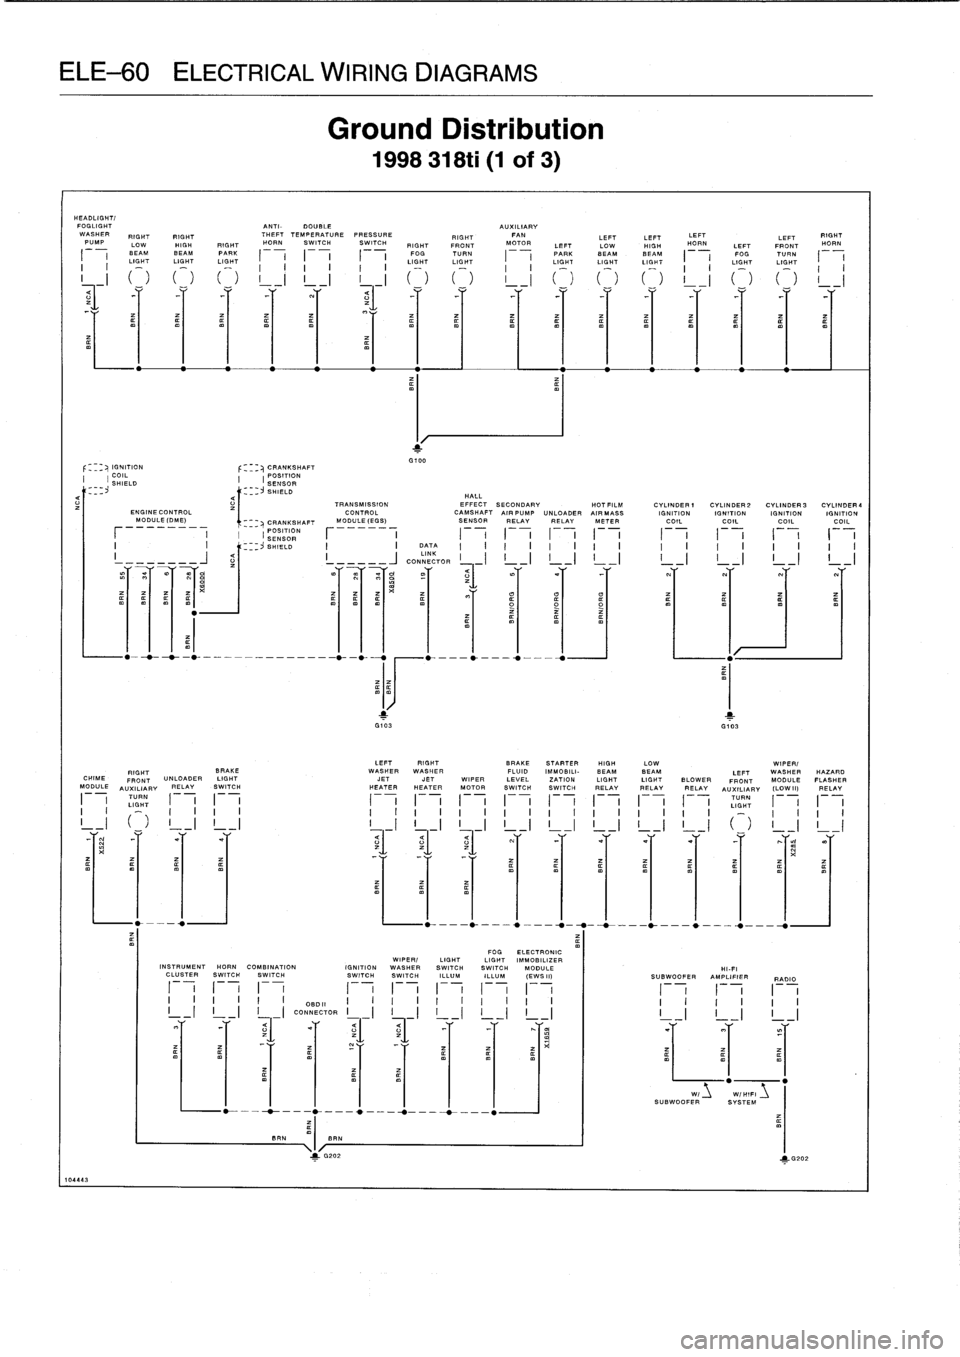 BMW 323i 1995 E36 Service Manual 
ELE-60
ELECTRICAL
WIRING
DIAGRAMS

HEADLIGHT/
FOGLIGHT

	

ANTI-
DOUBLE

	

AUXILIARY
WASHER

	

RIGHT

	

RIGHT

	

THEFT
TEMPERATURE
PRESSURE

	

RIGHT

	

FAN

	

LEFT

	

LEFT

	

LEFT

	

LEFT

